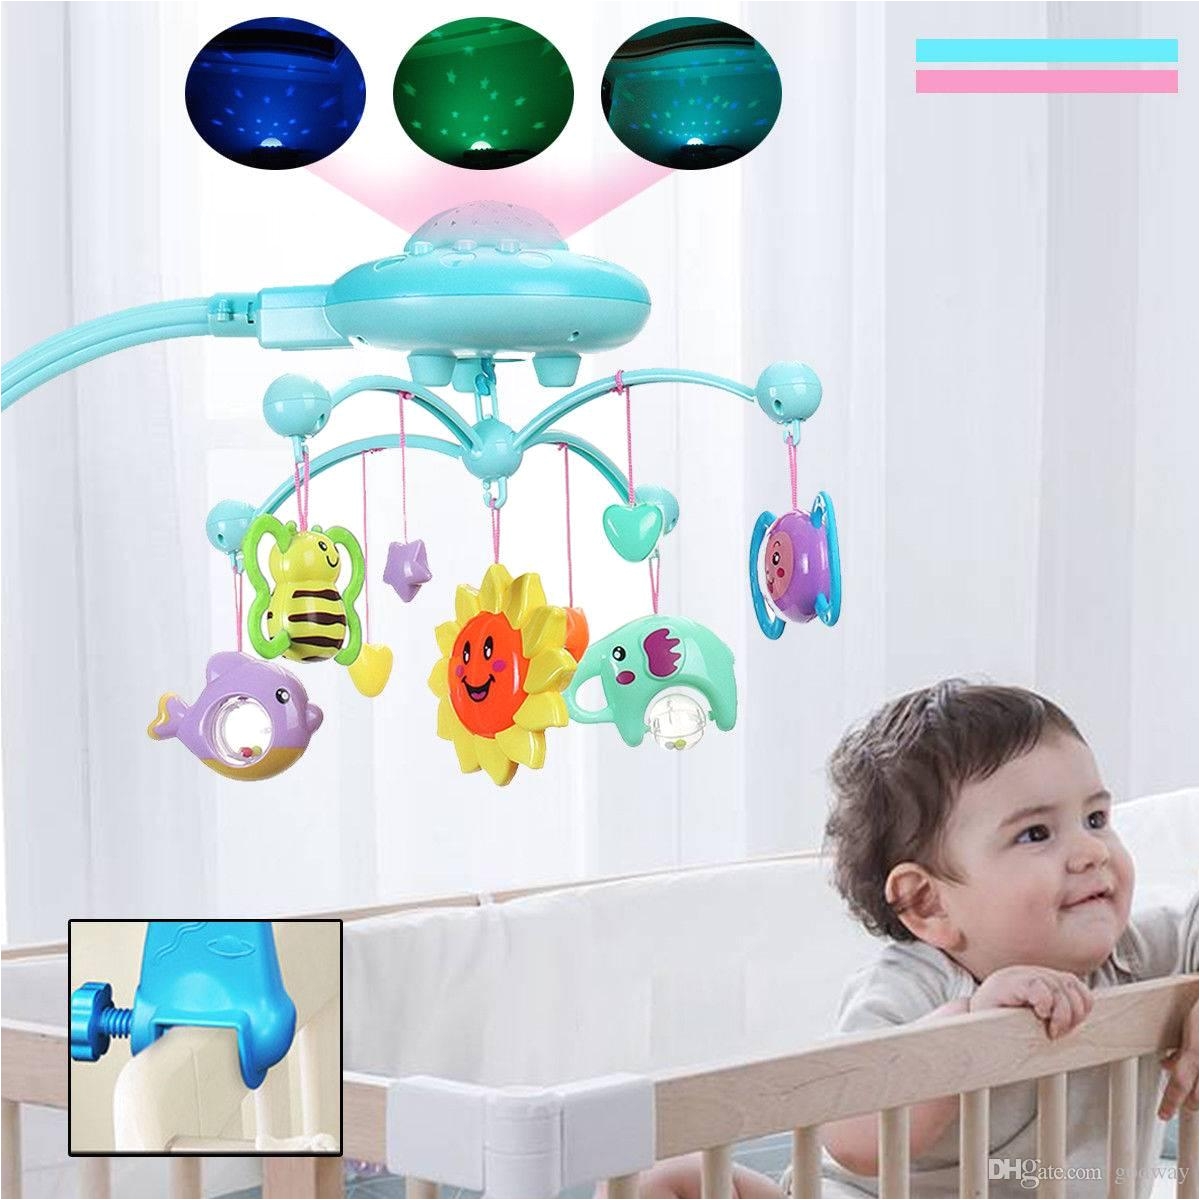 2018 baby bed mobile musical cot crib rotary music box kid stars light projection toy baby hanging mobiles toy from godway 19 09 dhgate com